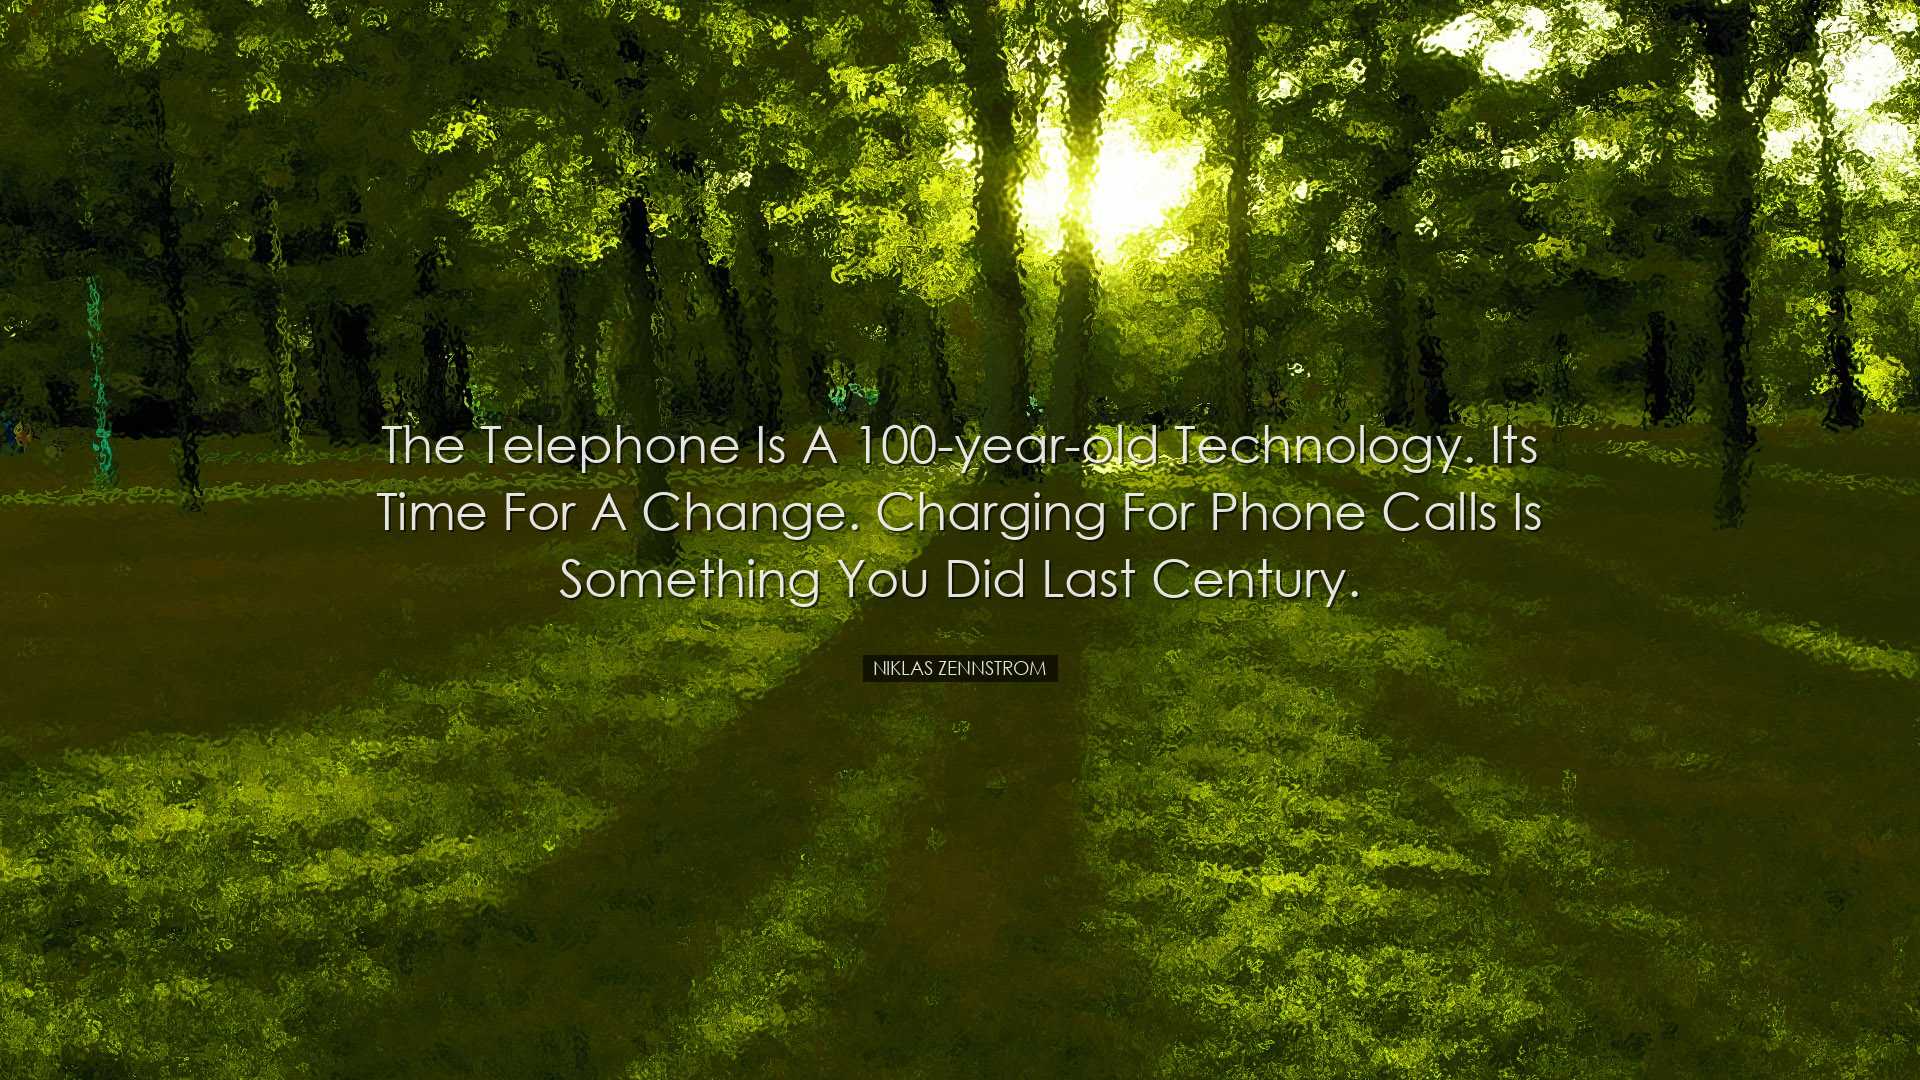 The telephone is a 100-year-old technology. Its time for a change.